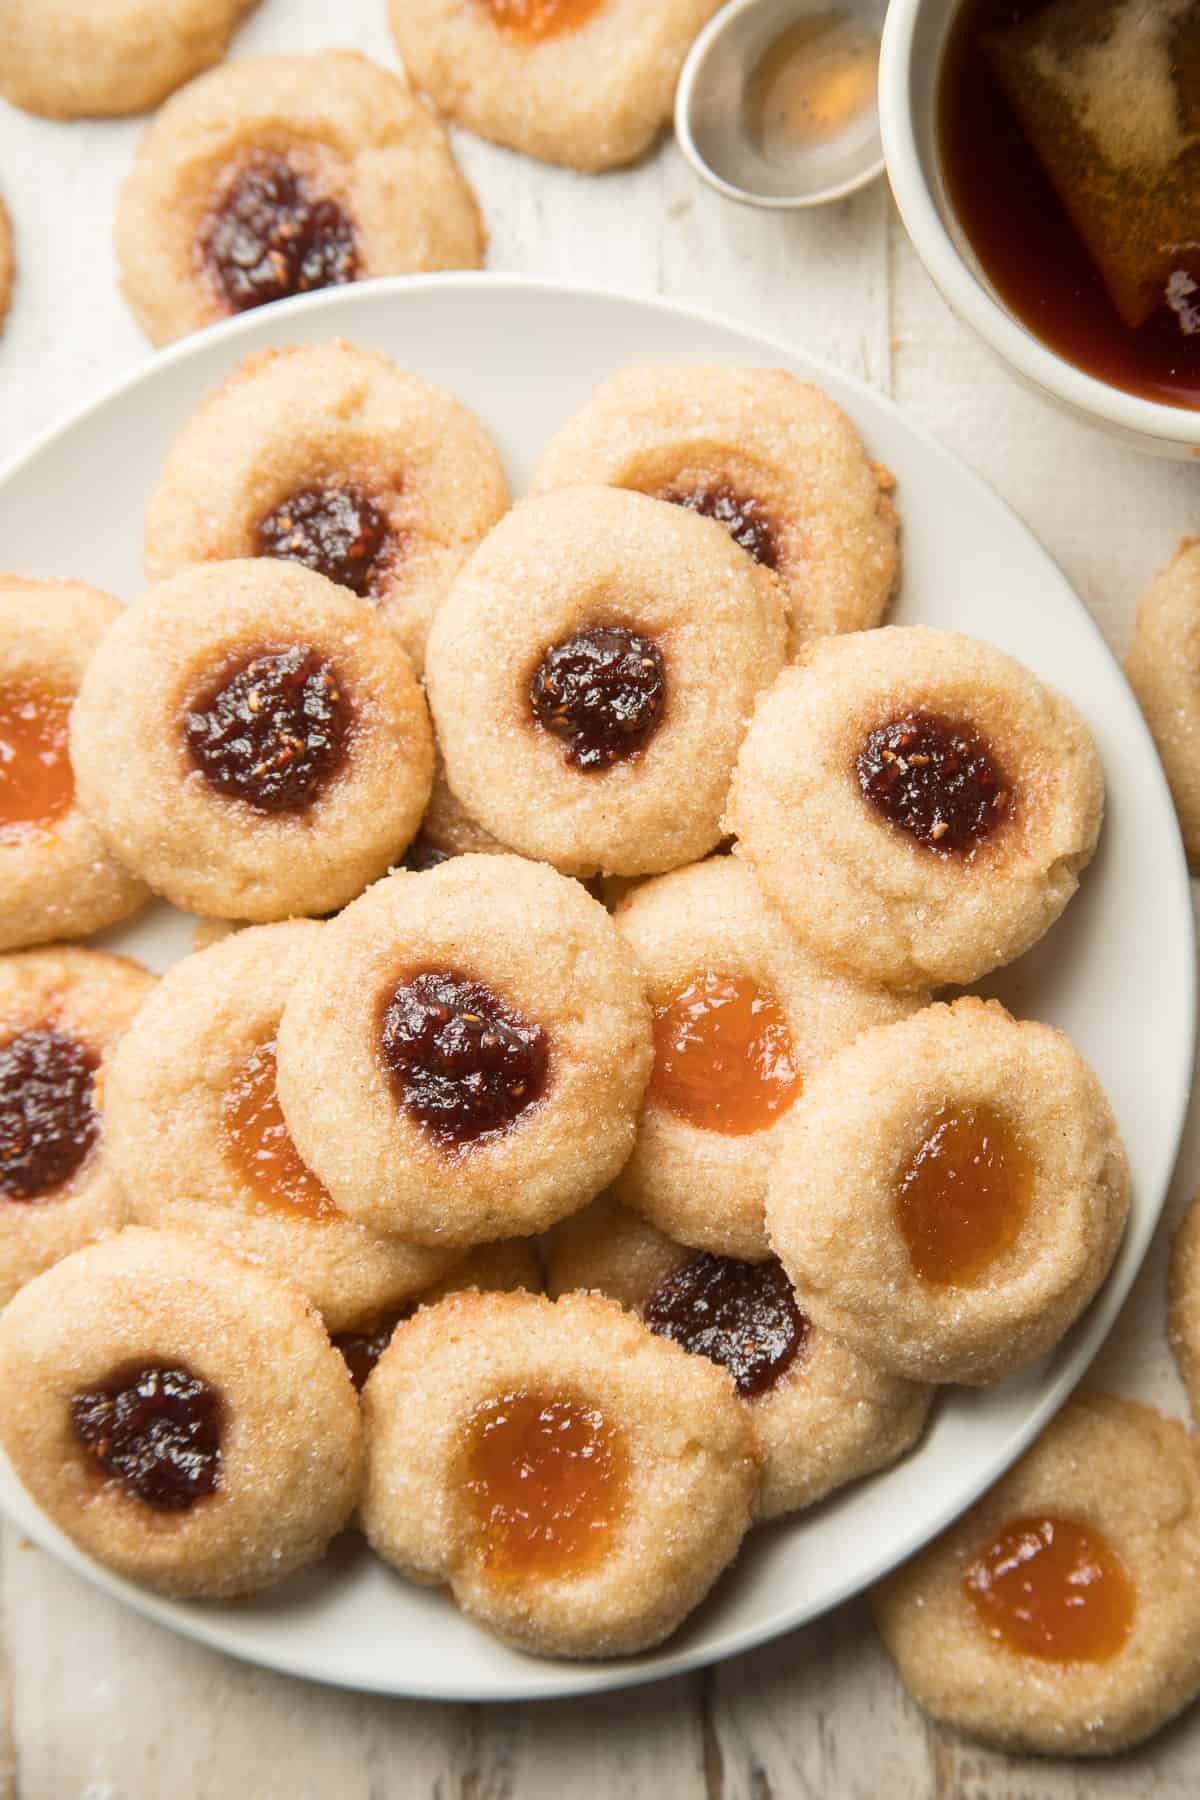 Dish of Vegan Thumbprint Cookies on a white wooden surface with a cup of tea.